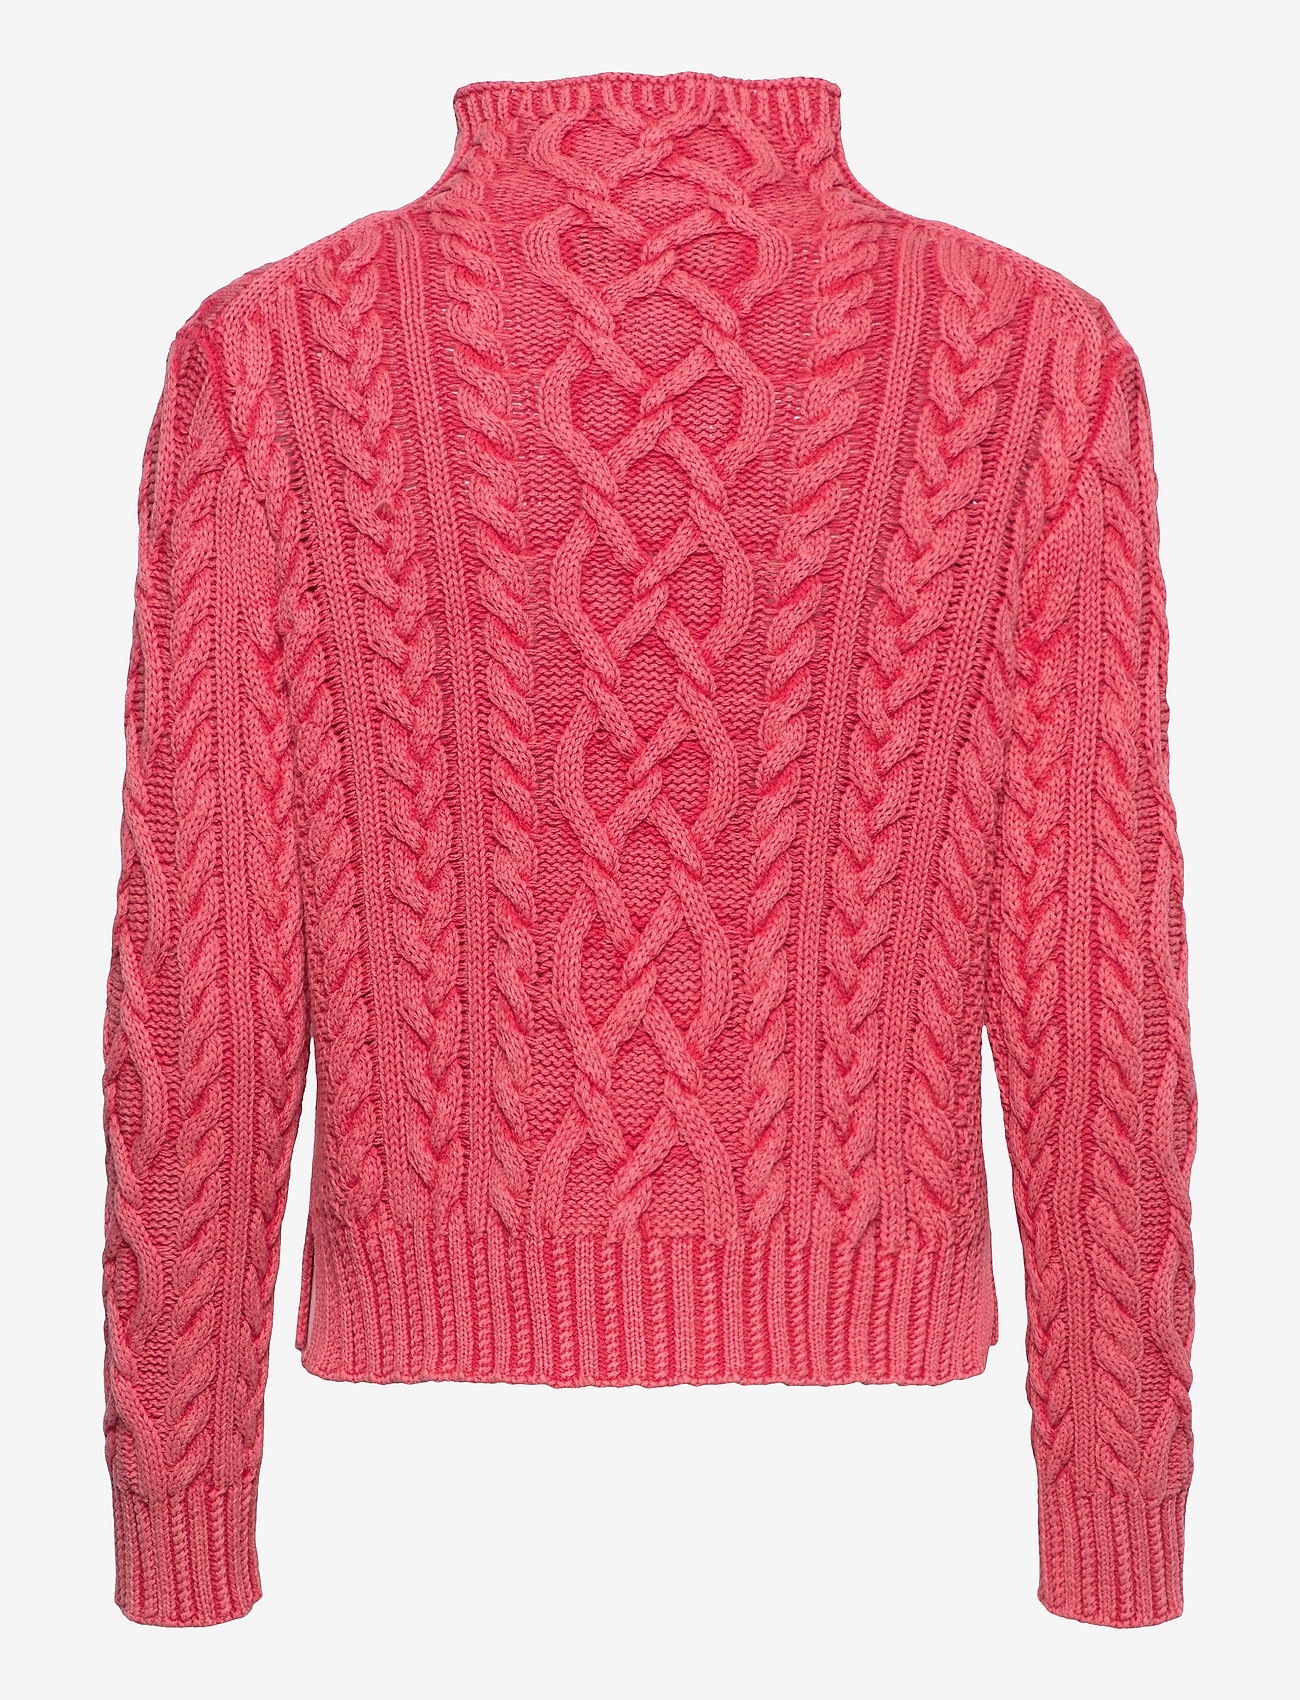 Polo Ralph Lauren - Aran-Knit Cotton Turtleneck Sweater - jumpers - washed amalfi red - 1